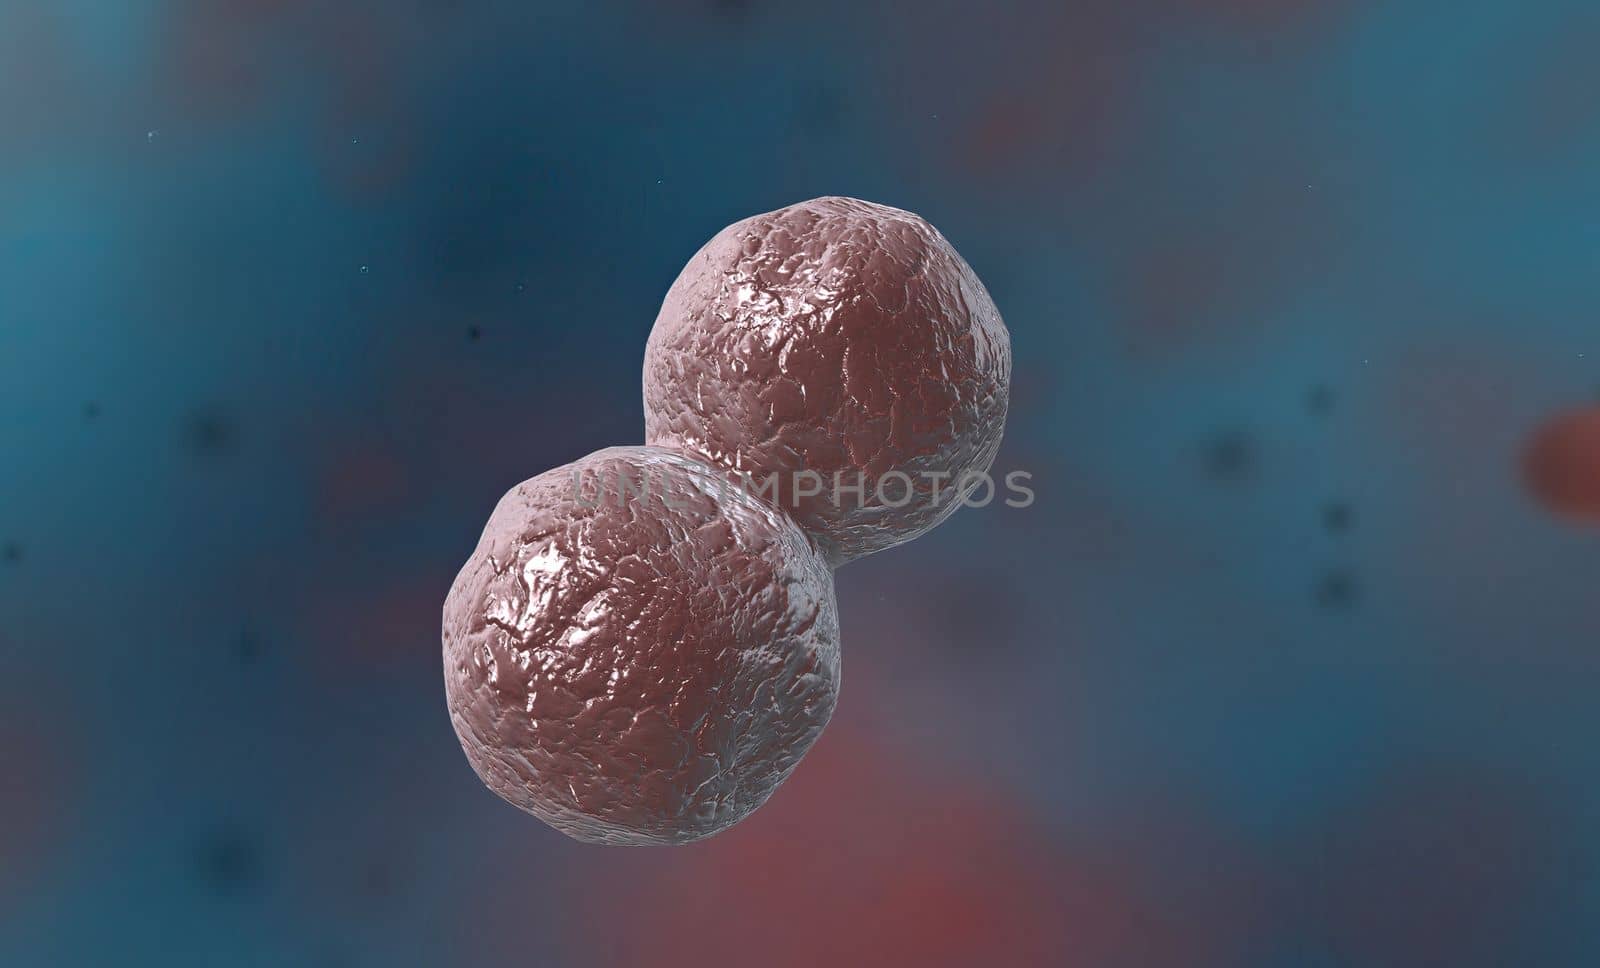 A cocci are any bacteria or archaeon that have a spherical, oval, or generally round shape. by creativepic